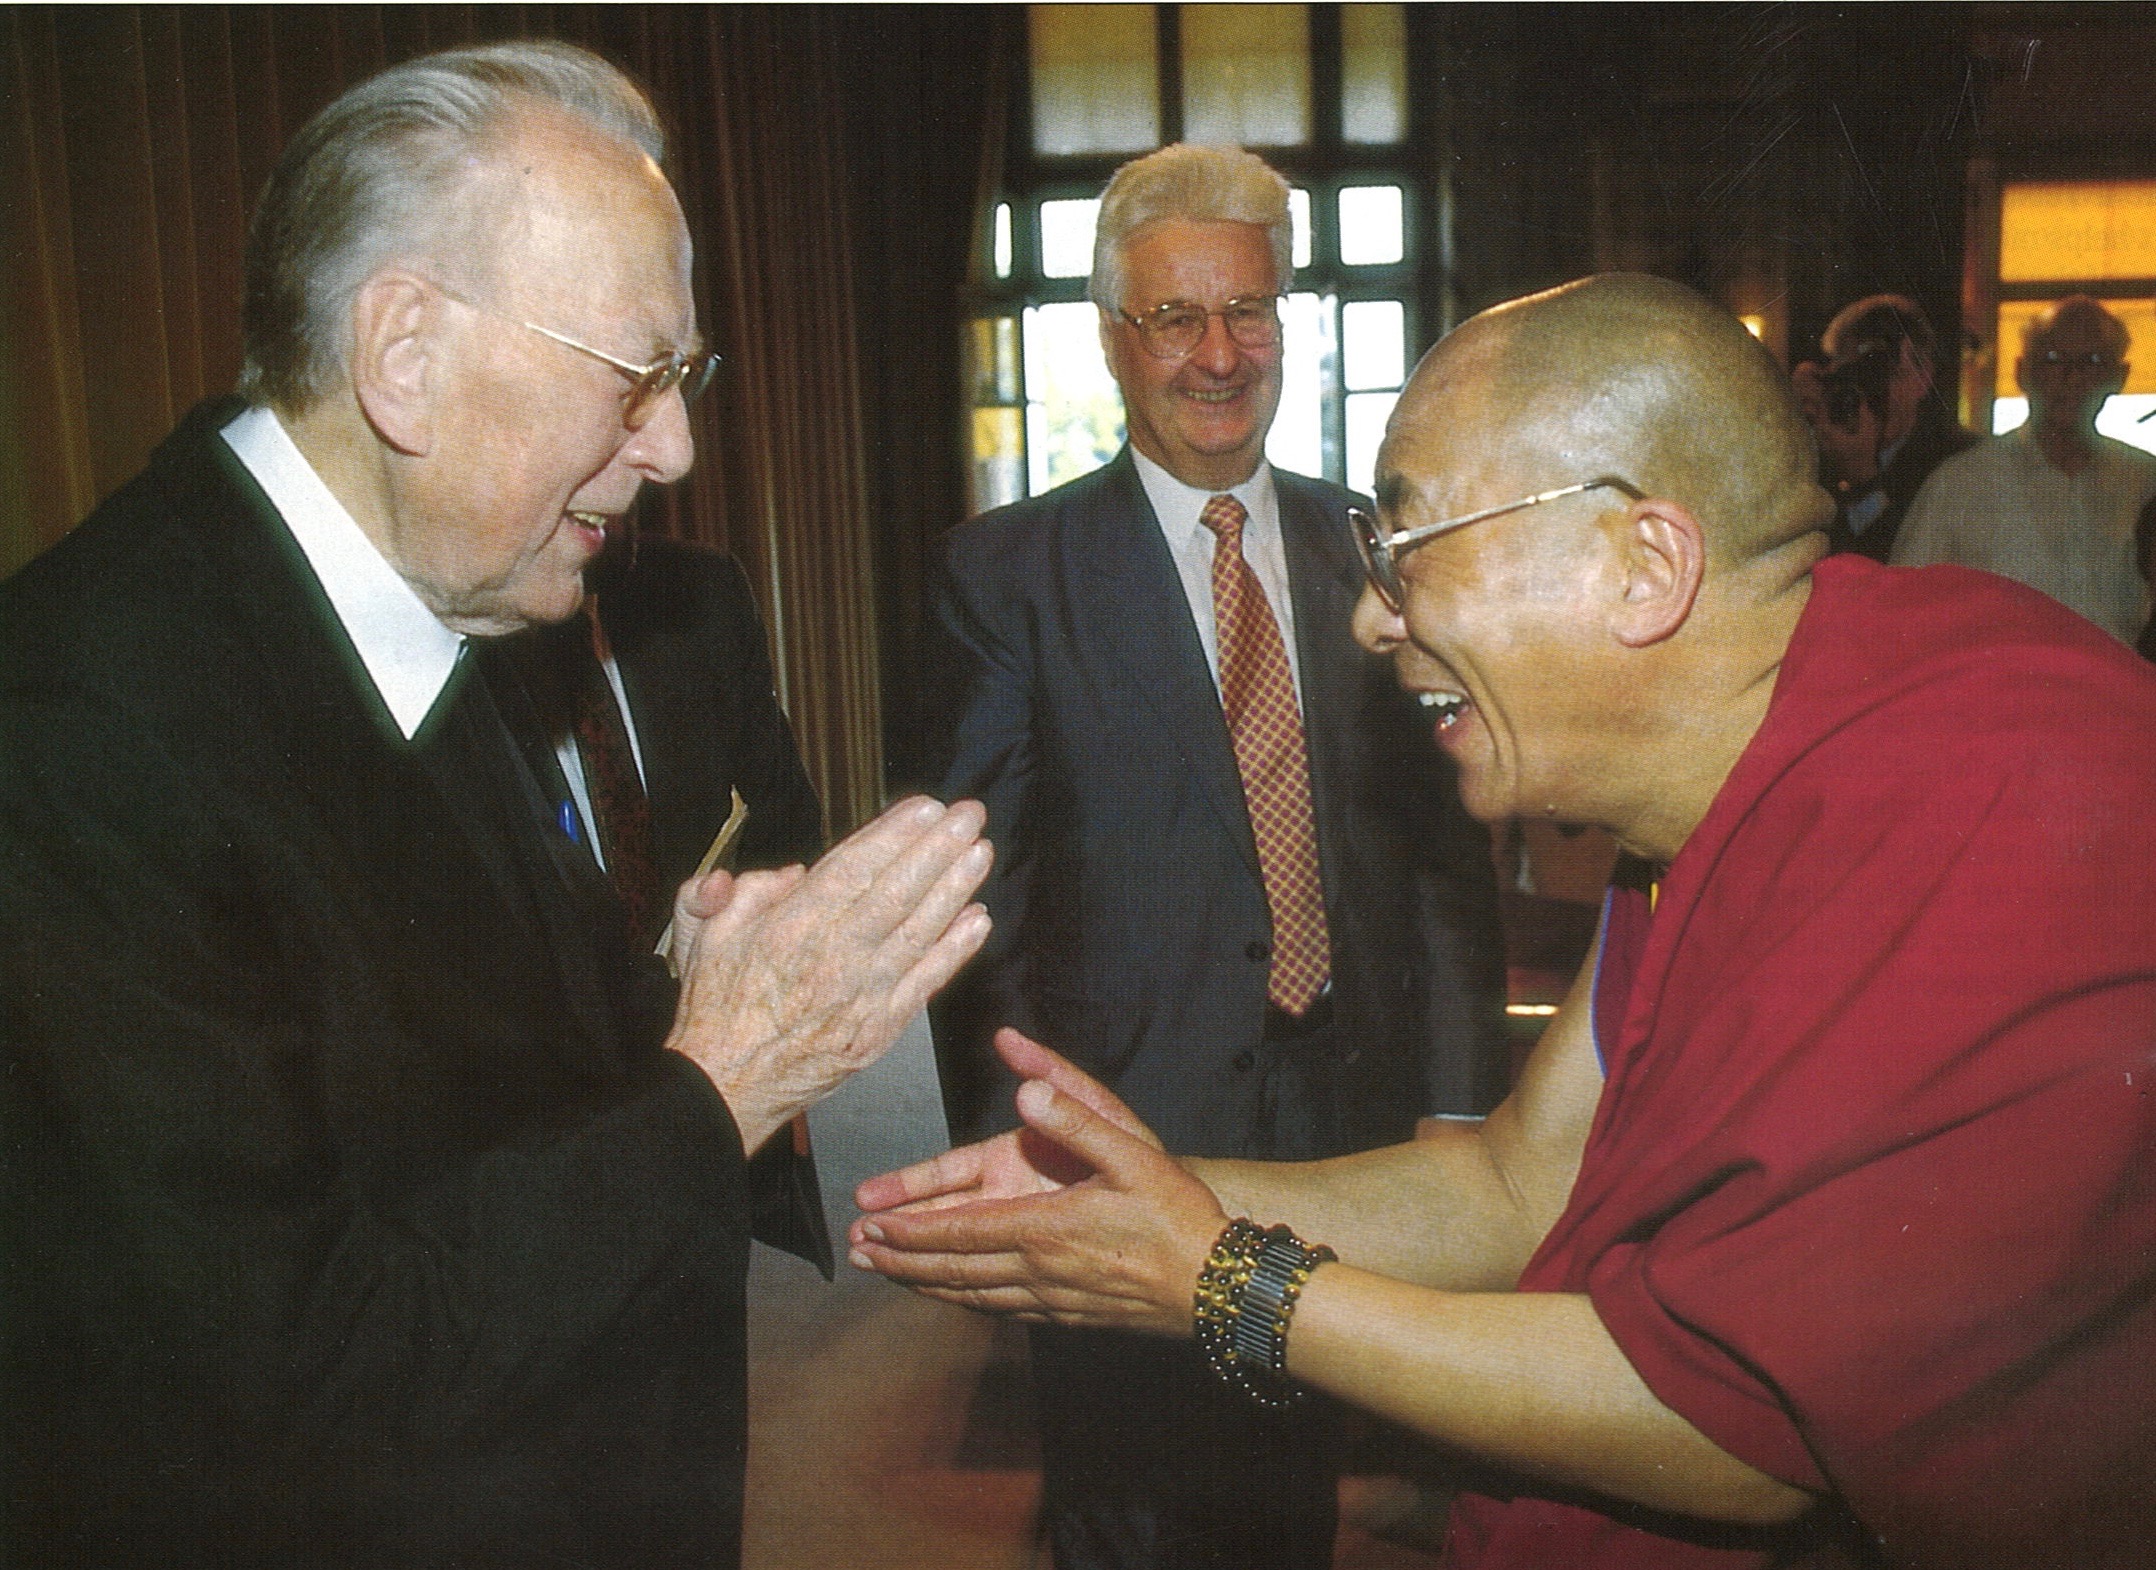 Cardinal König greets Dalai Lama in Caux in 1996, watched by Heinrich Rusterholz, President of the Federation of Protestant Churches in Switzerland. Credit: G. Williams